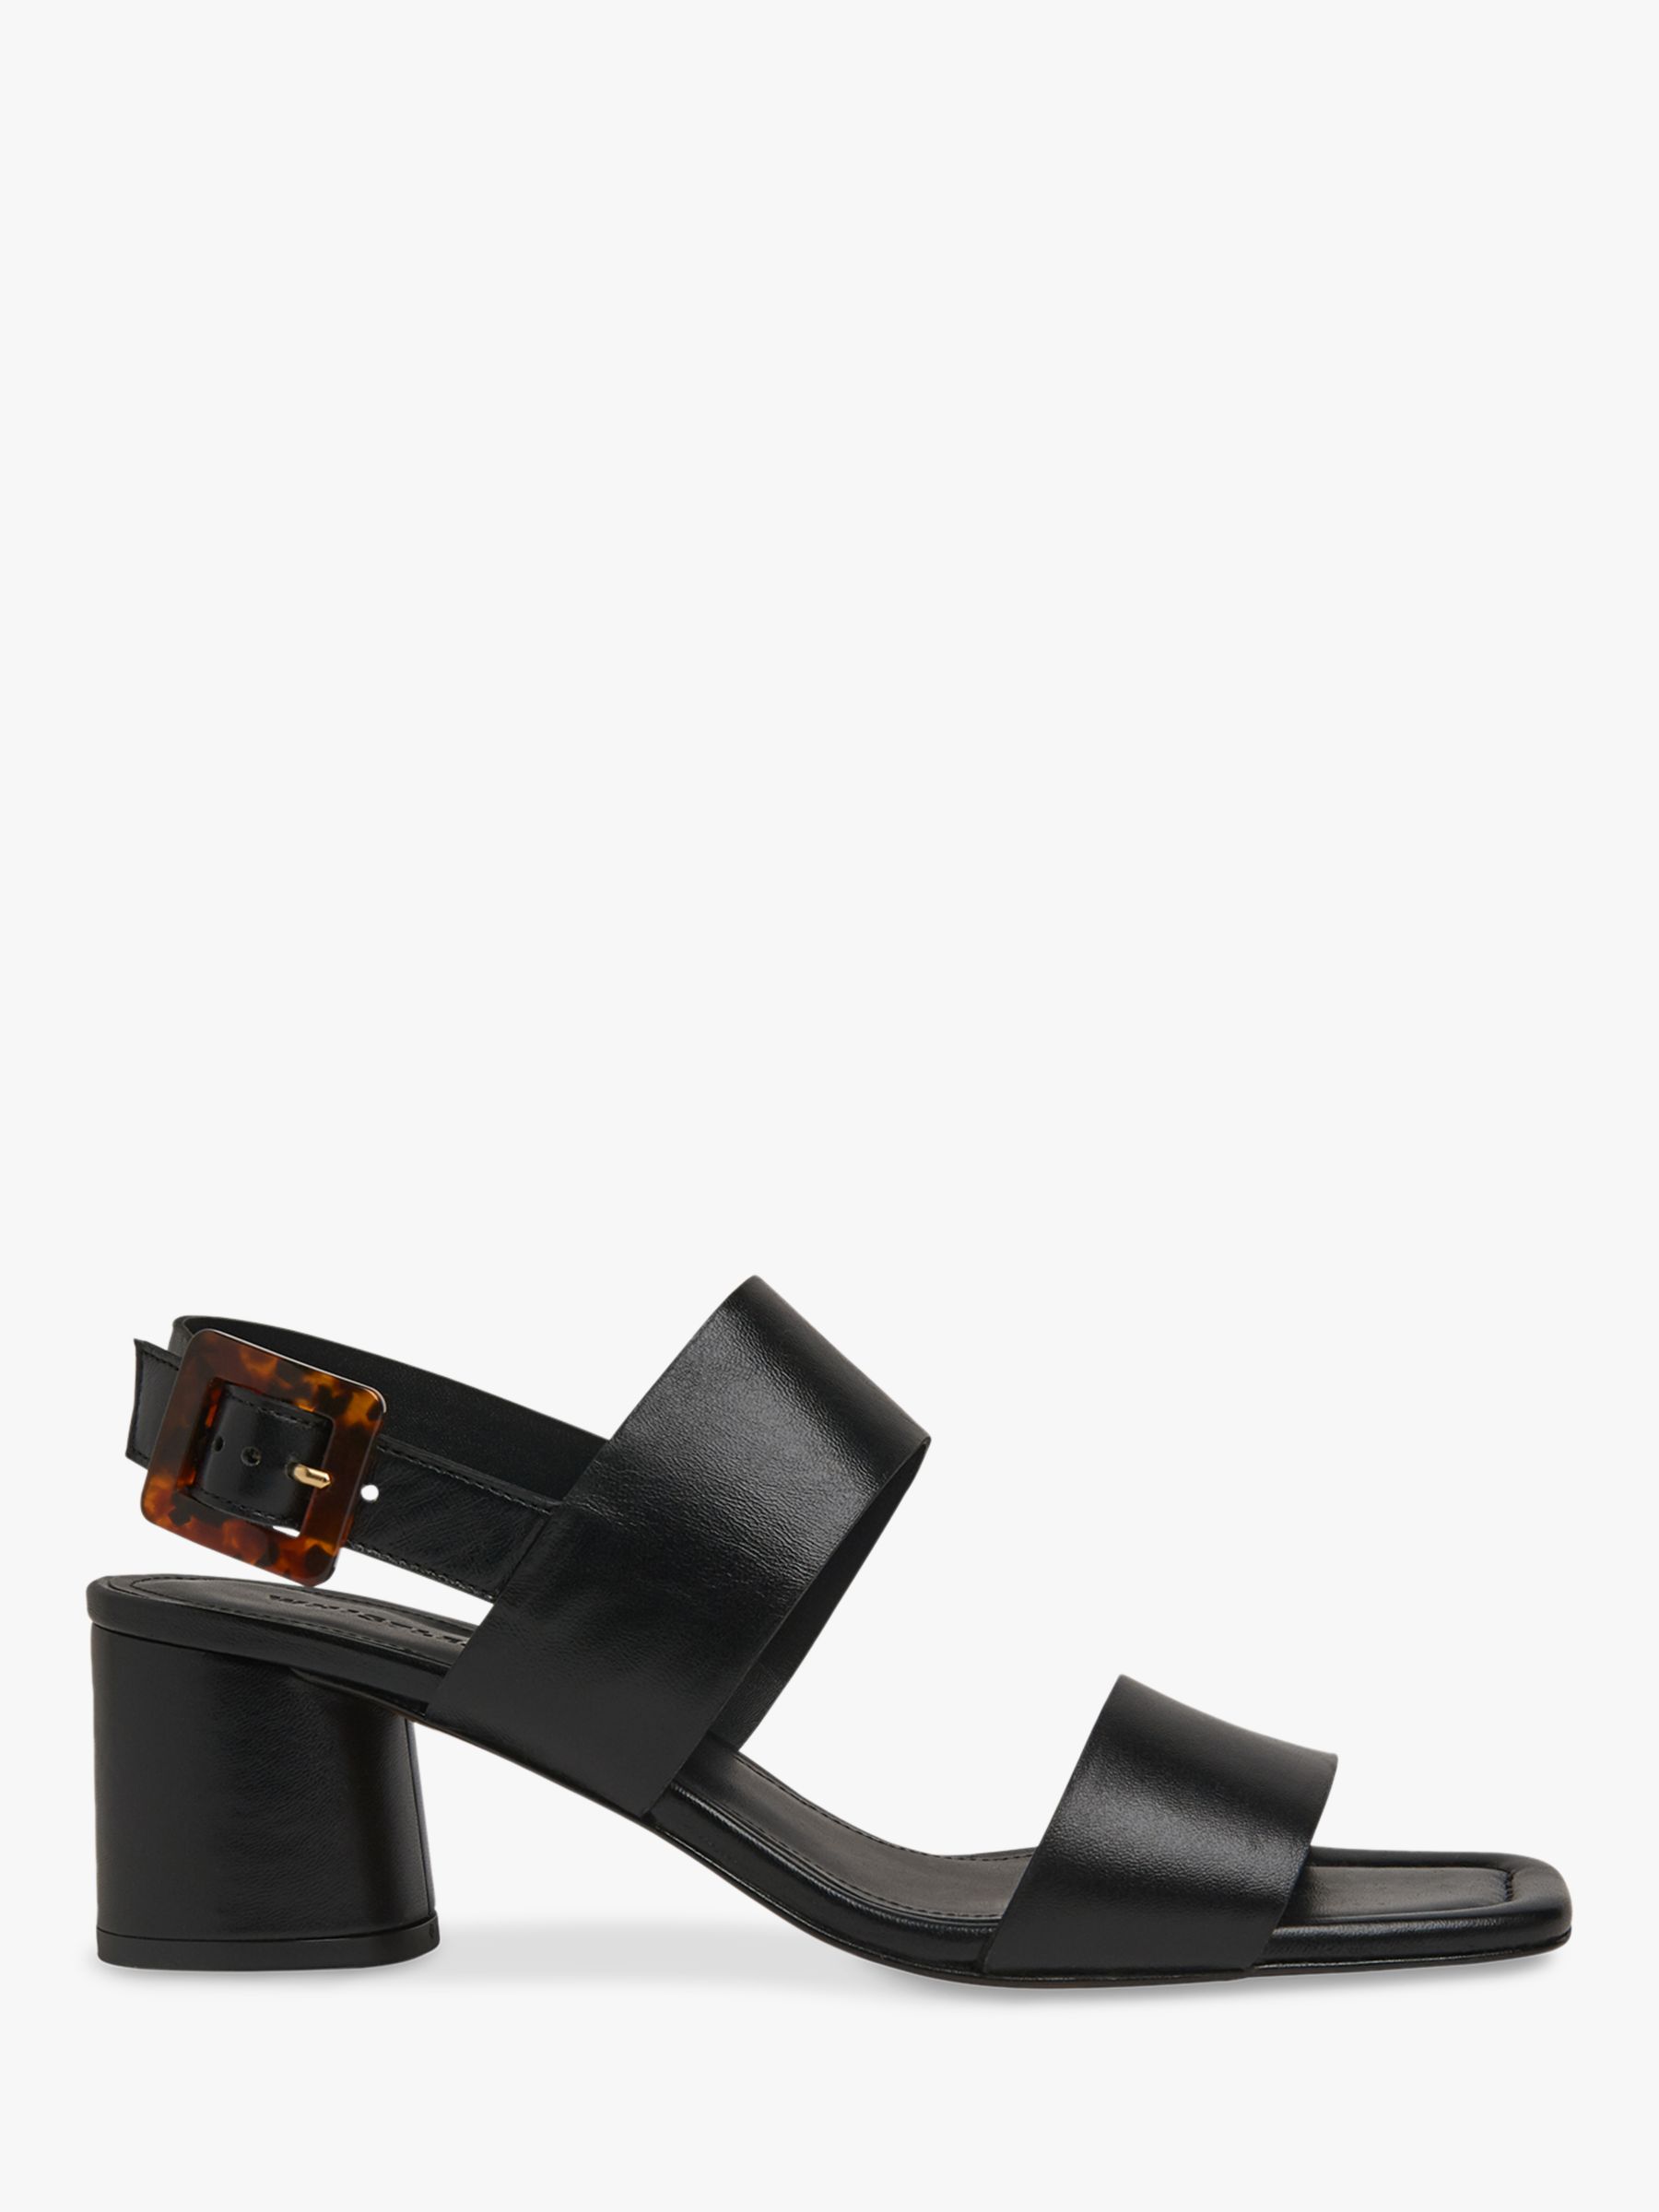 Whistles Avery Tortoise Buckle Sandals, Black Suede